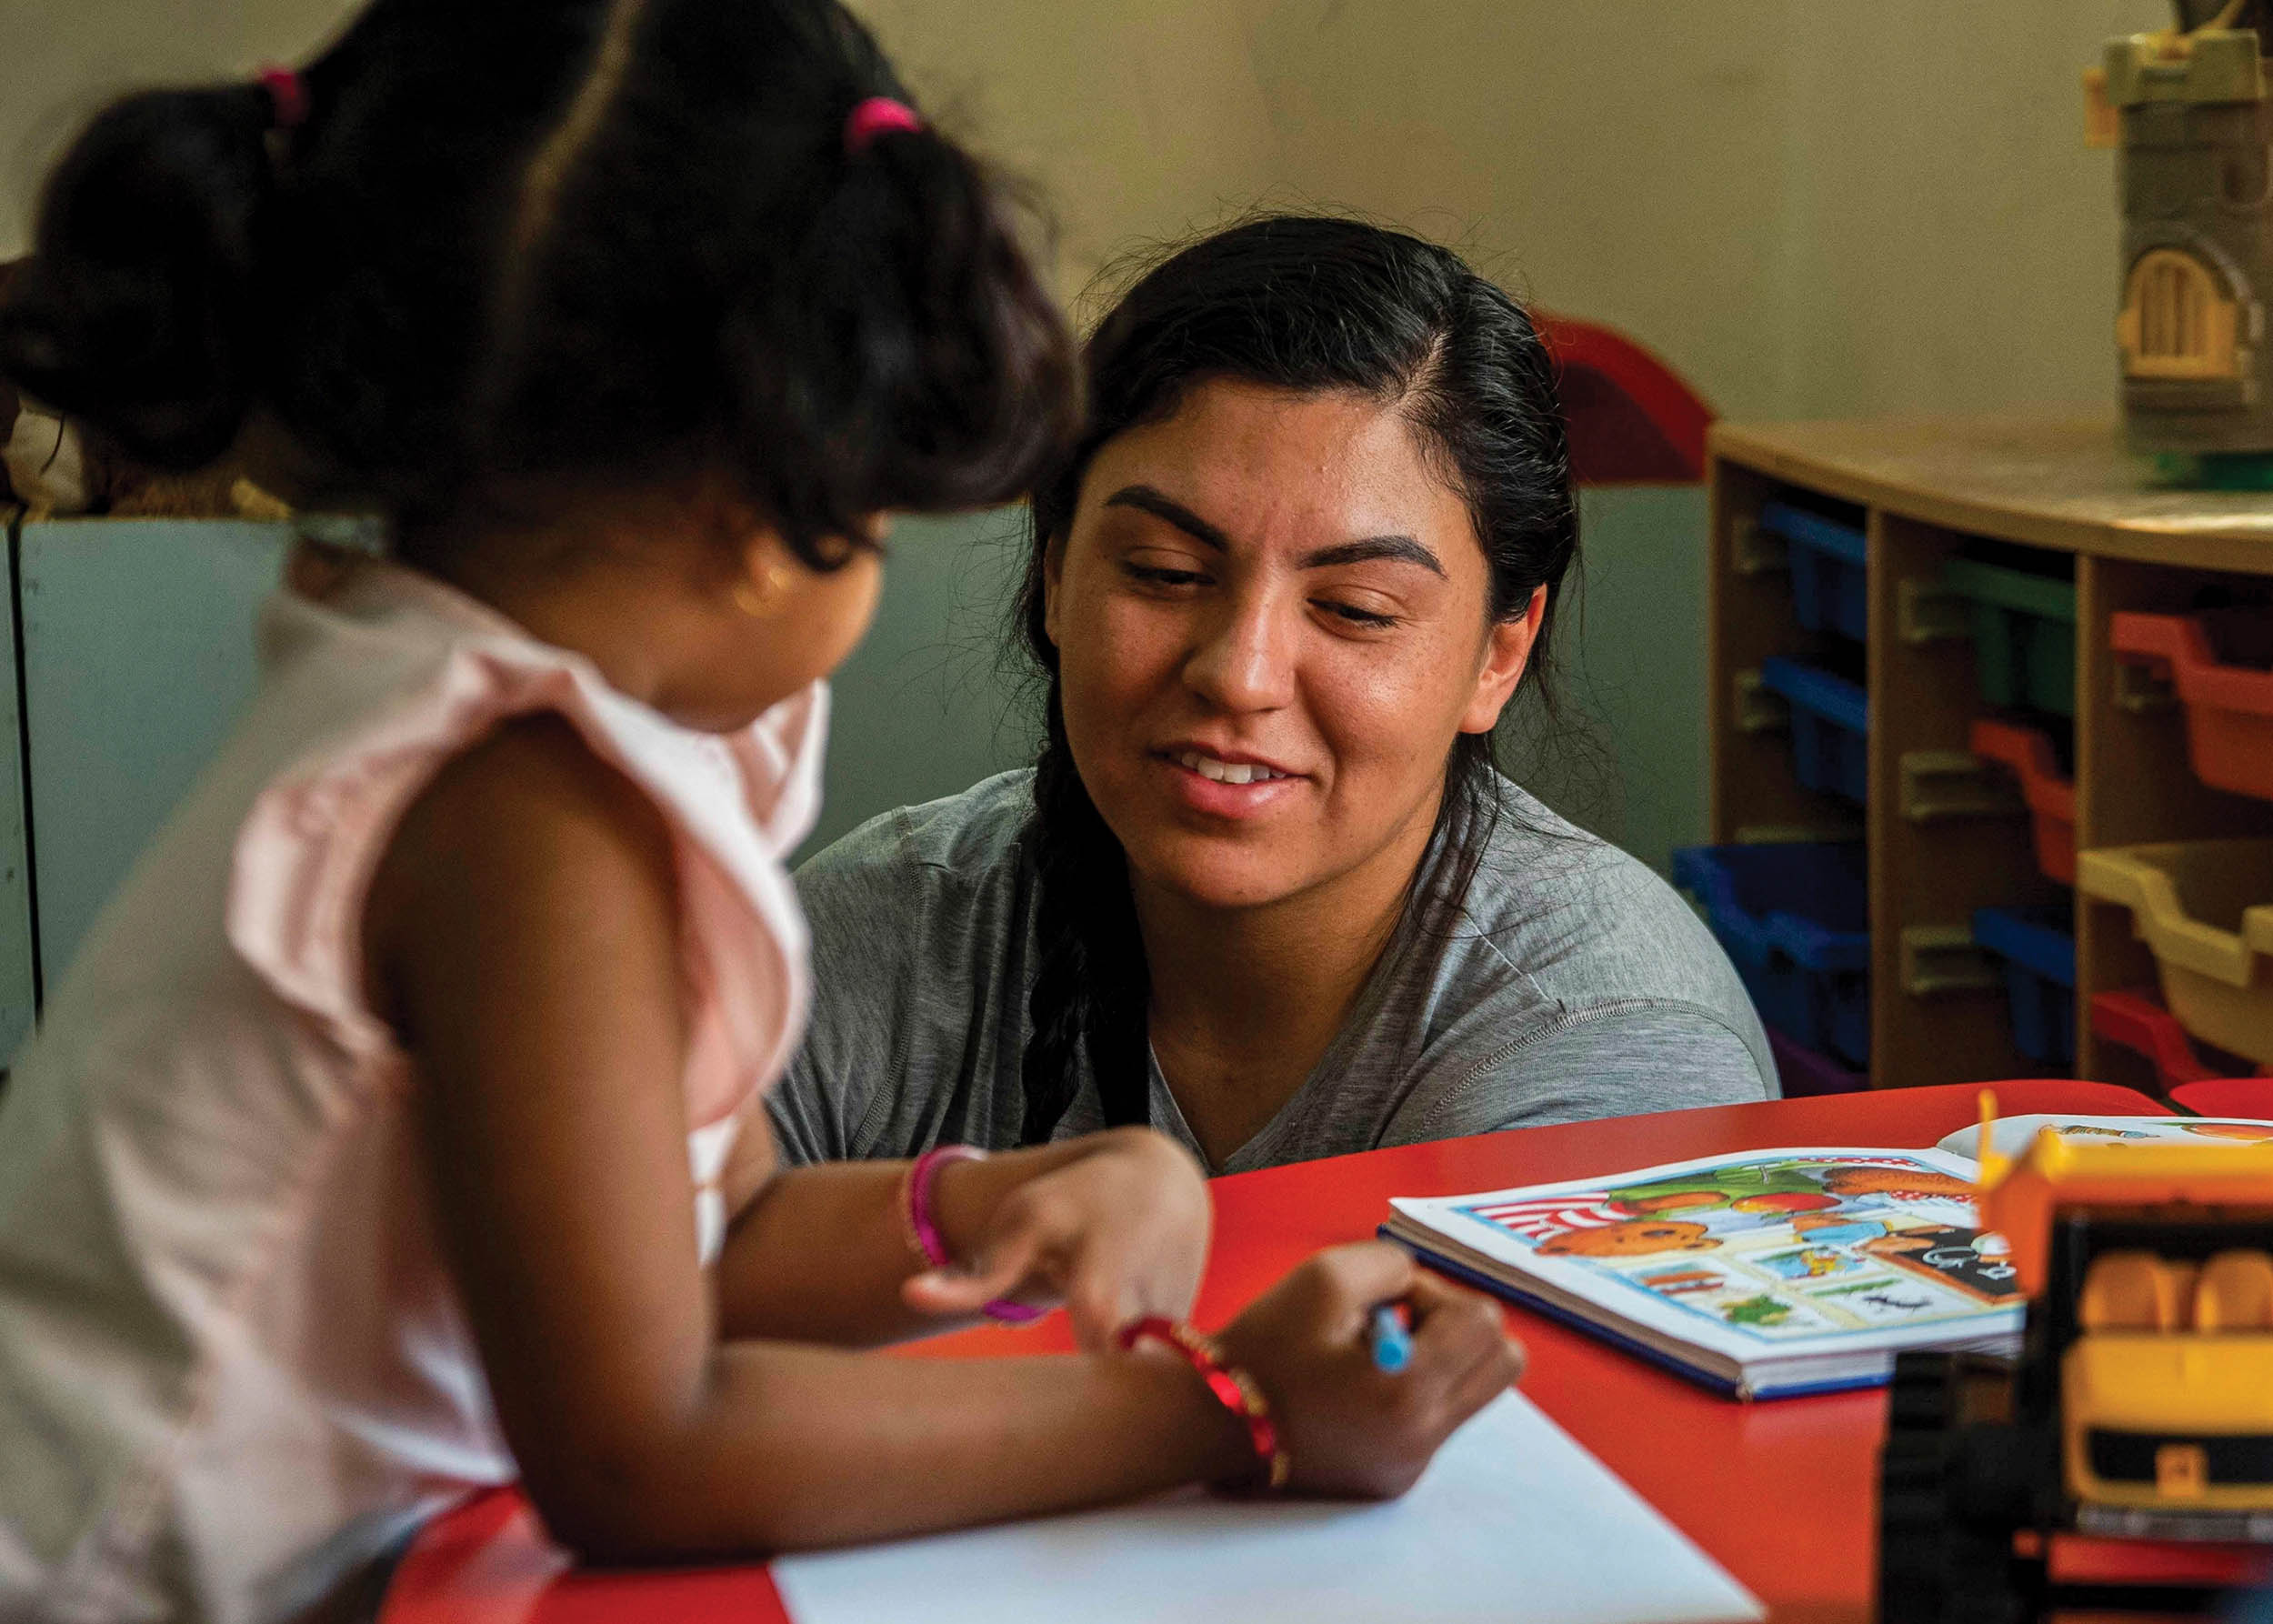 Aircrew Survival Equipmentman 2nd Class Sonia Aquino, assigned to guided-missile destroyer USS Gridley, talks to child from Rehabilitation Institute for Autism during community service event in Manama, Bahrain, April 6, 2022 (U.S. Navy/Colby A. Mothershead)